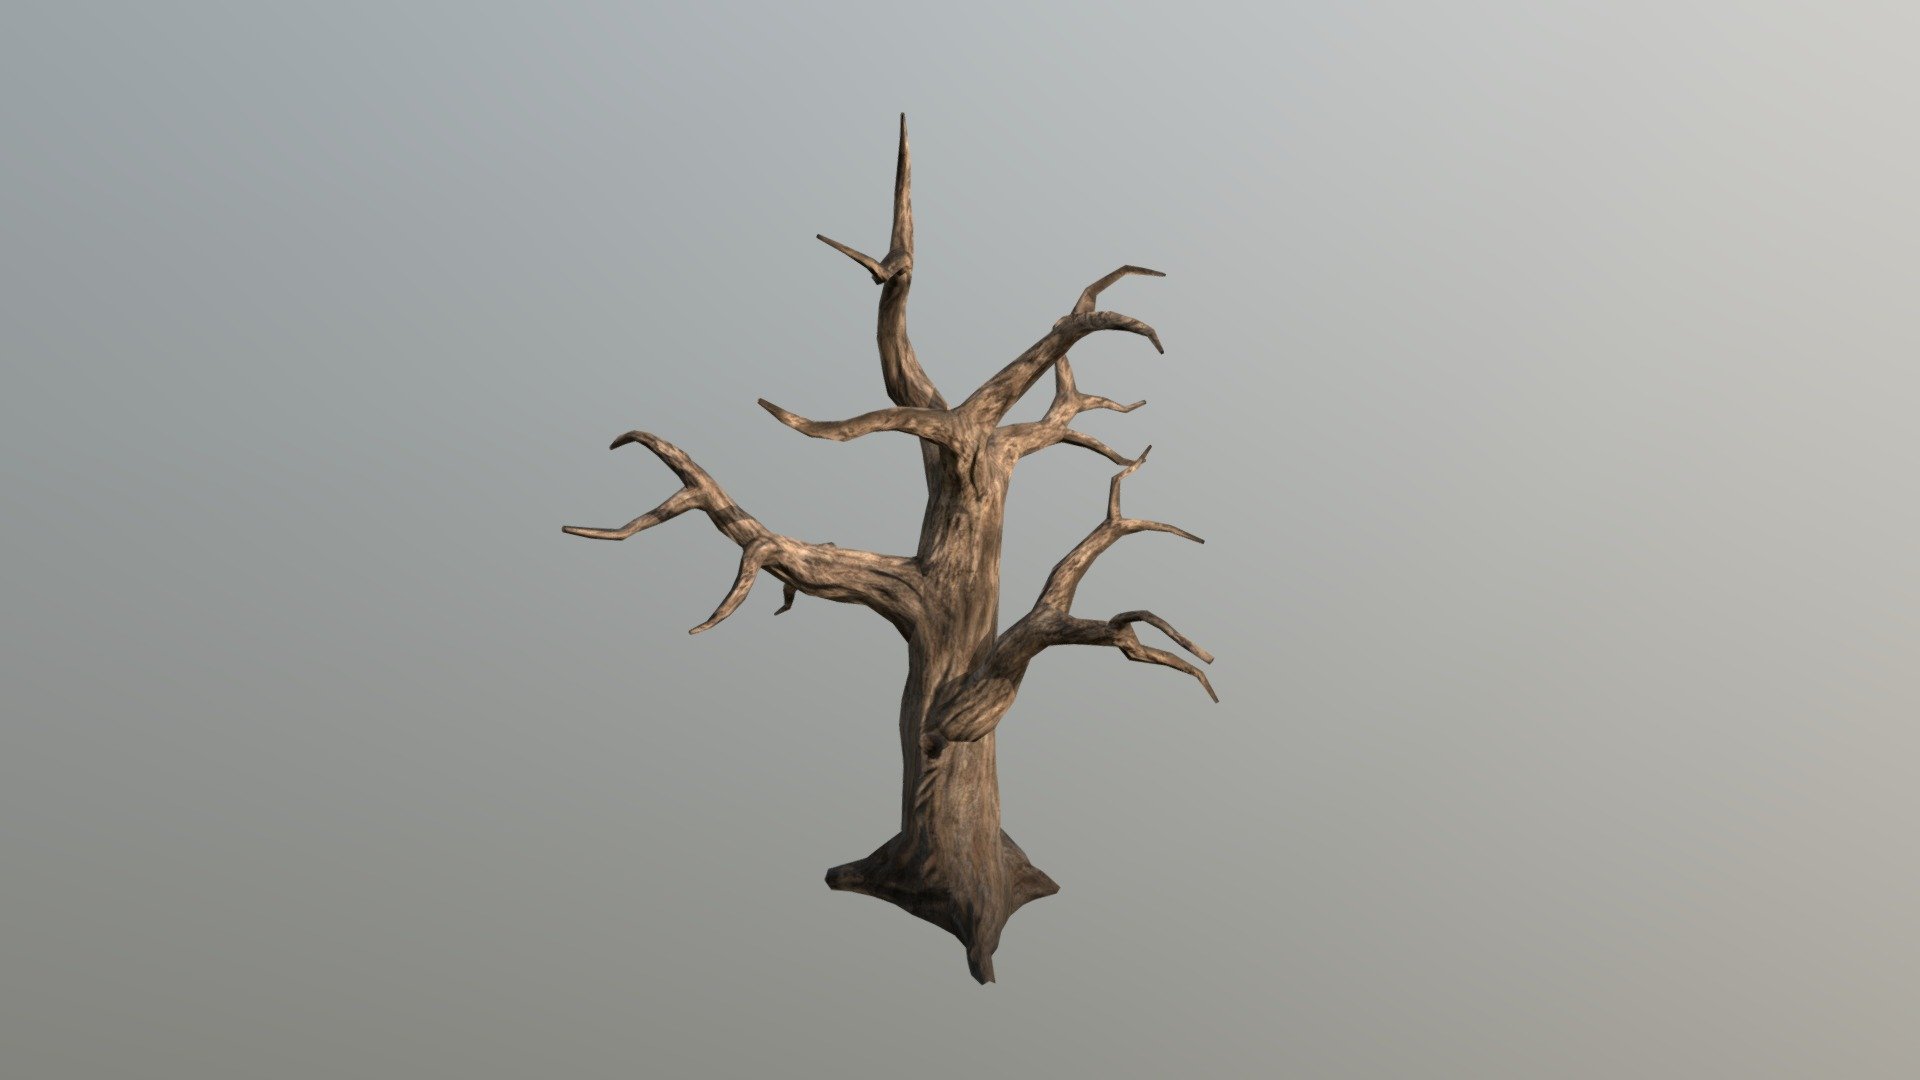 3D Dead Trees.

The pack has highly detailed dead trees ready for use in your project. Just drag and drop prefabs into your scene and achieve beautiful results in no time. Available formats FBX, 3DS Max 2017


We are here to empower the creators. Please contact us via the https://aaanimators.com/#contact-area if you are having issues with our assets. Our team will get back to you momentarily.



Mesh complexities:


Tree_01 1427 verts; 2135 tris  



Includes 1 set of textures with 4 materials:

● Gloss

● Diffuse

● Normal

● Specular - Low Poly Dead Tree 01 - Buy Royalty Free 3D model by aaanimators 3d model